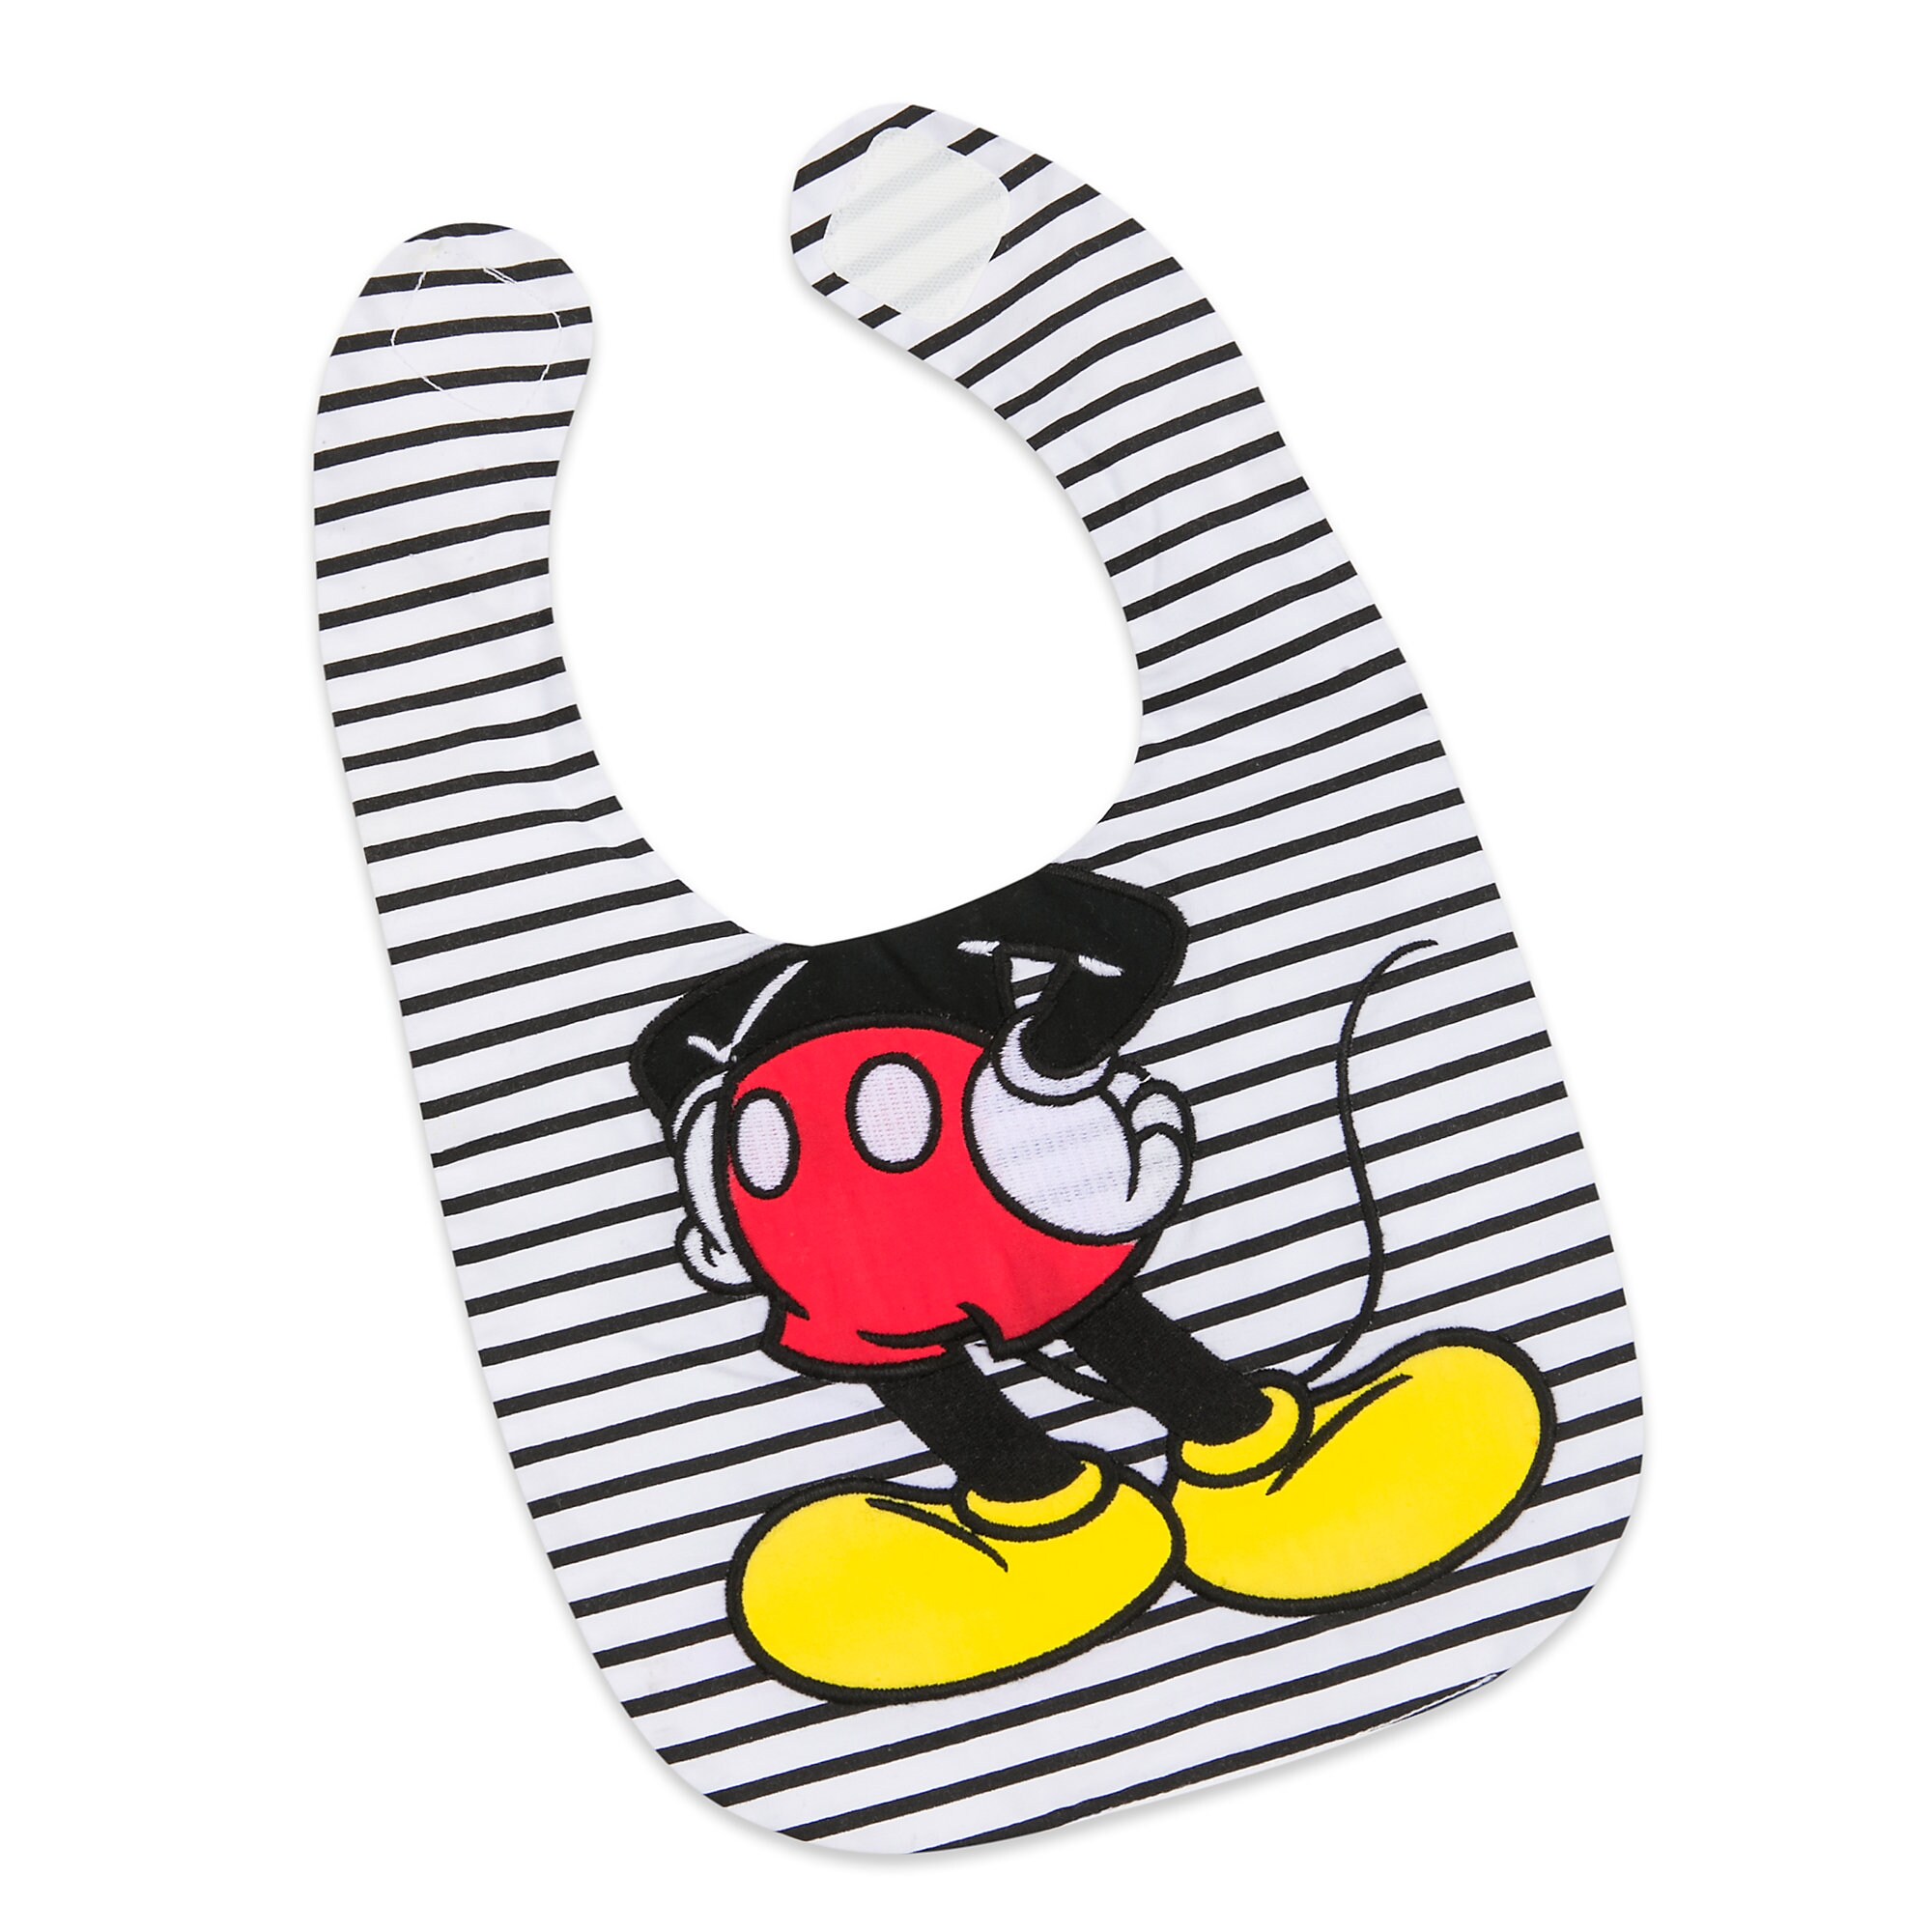 Mickey Mouse Bodysuit, Bib, and Beanie Set for Baby